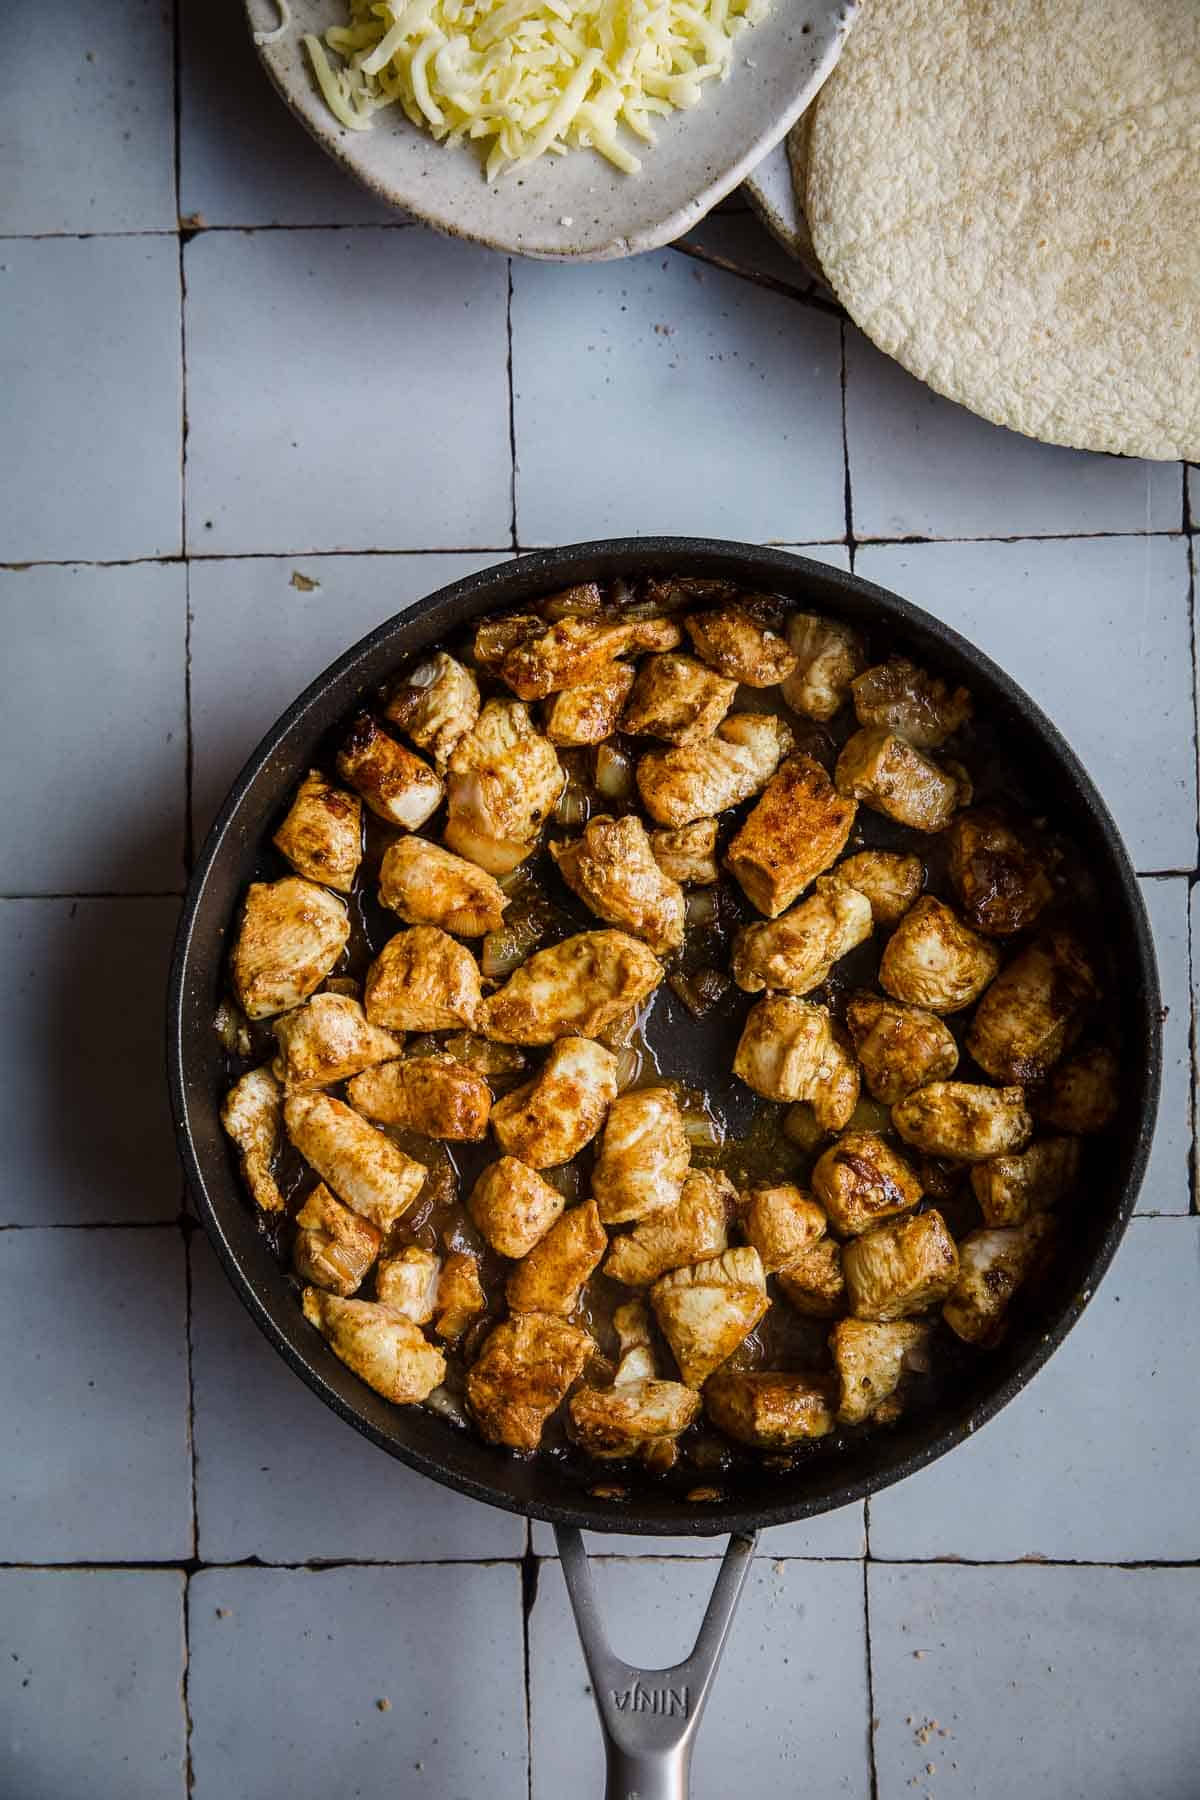 Chicken pieces in a black frying pan on a tiled background.